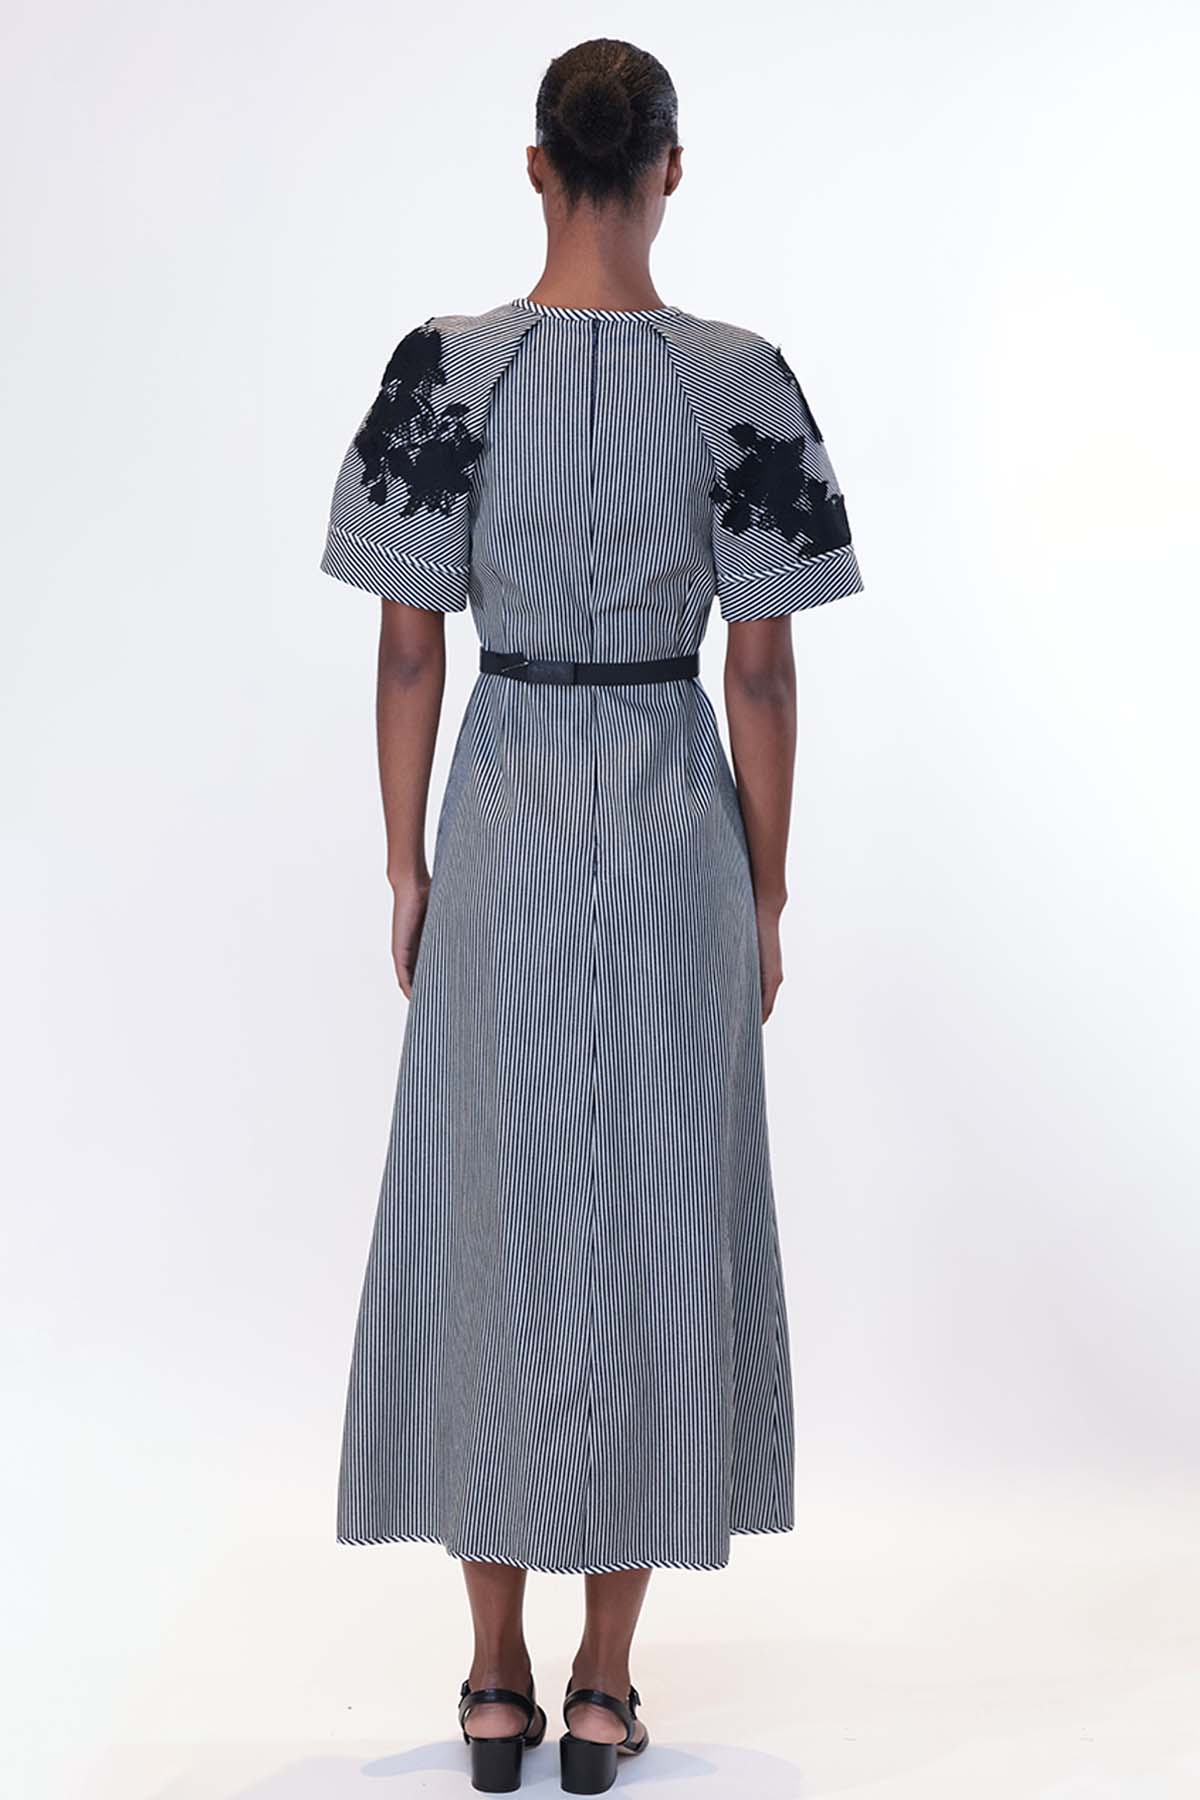 Japanese Denim Dress with Pleated Sleeves and Lace Applique 3